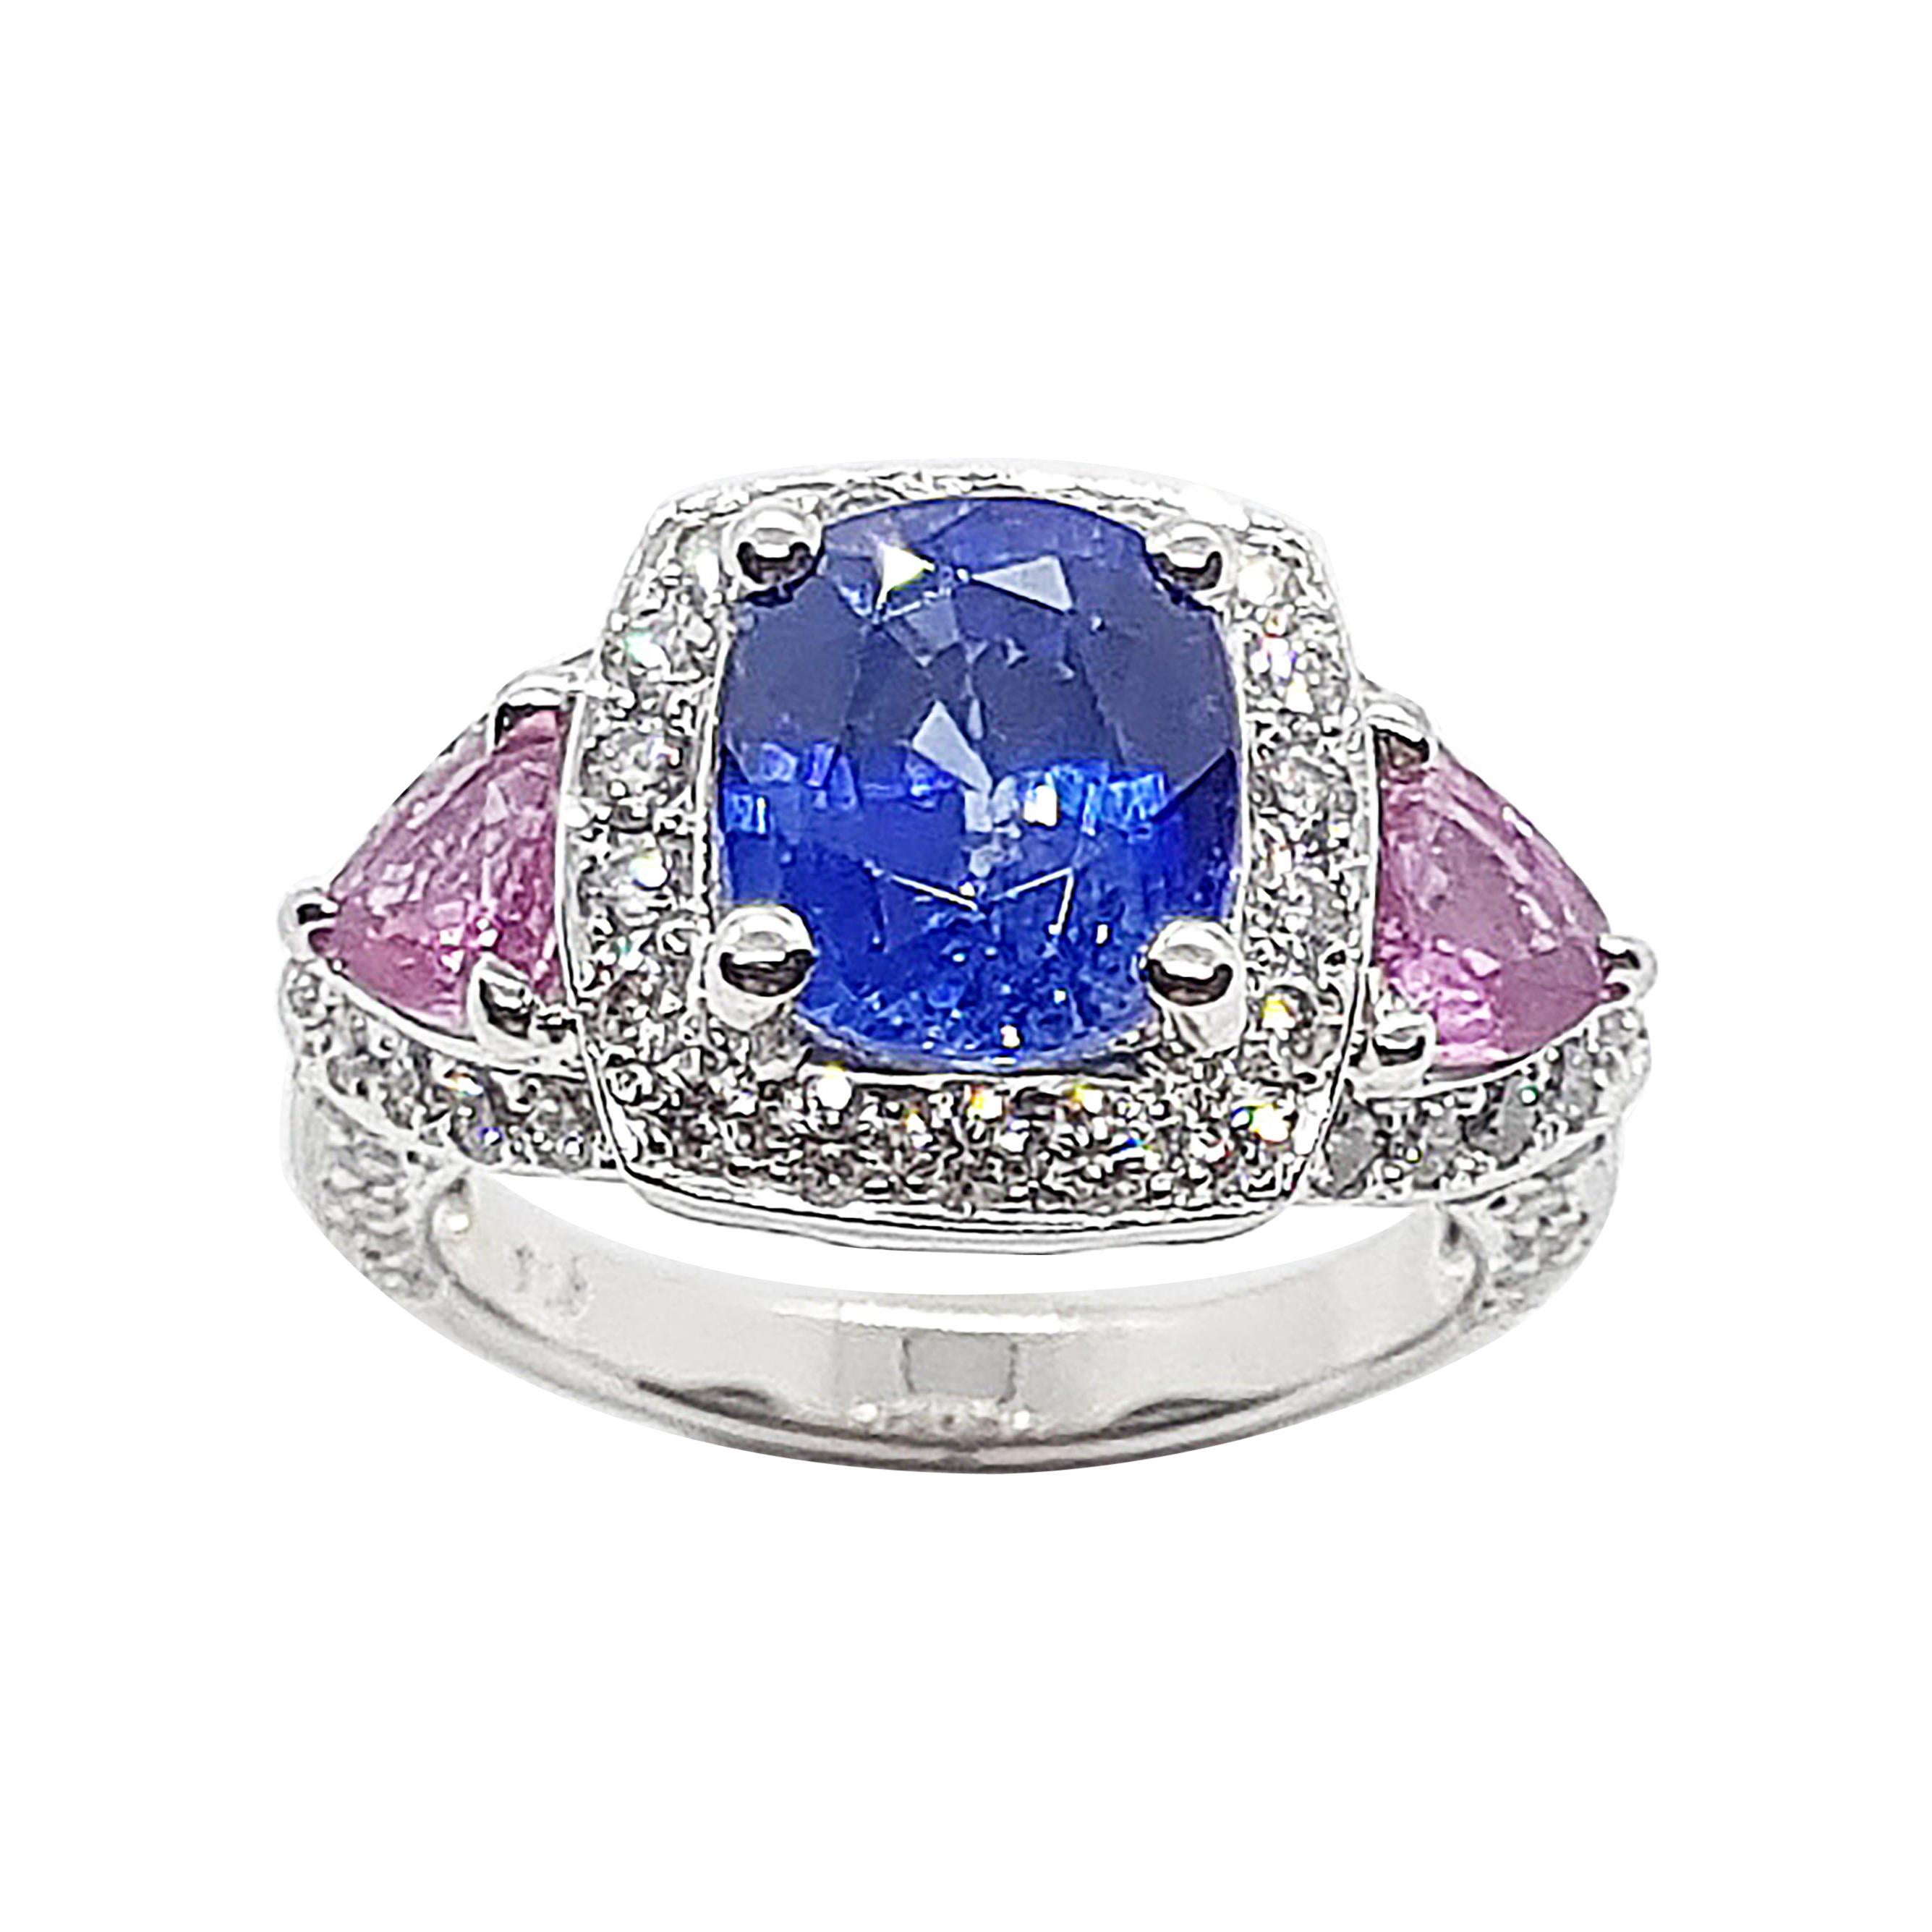 Blue Sapphire with Pink Sapphire and Diamond Ring Set in 18 Karat White Gold 